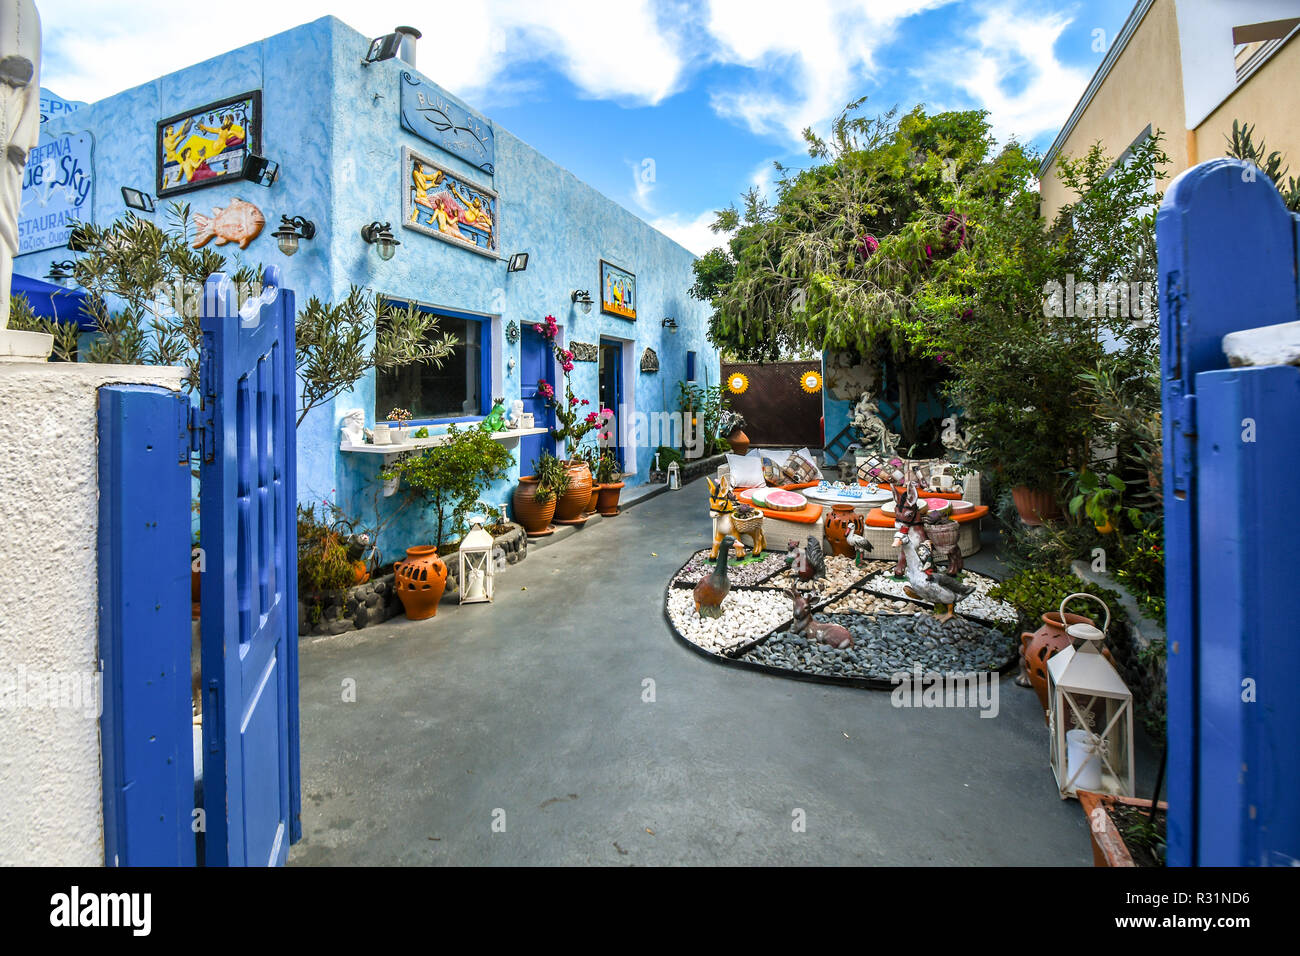 A colorful patio outside a souvenir shop and restaurant in the resort city of Thira on the island of Santorini, Greece. Stock Photo